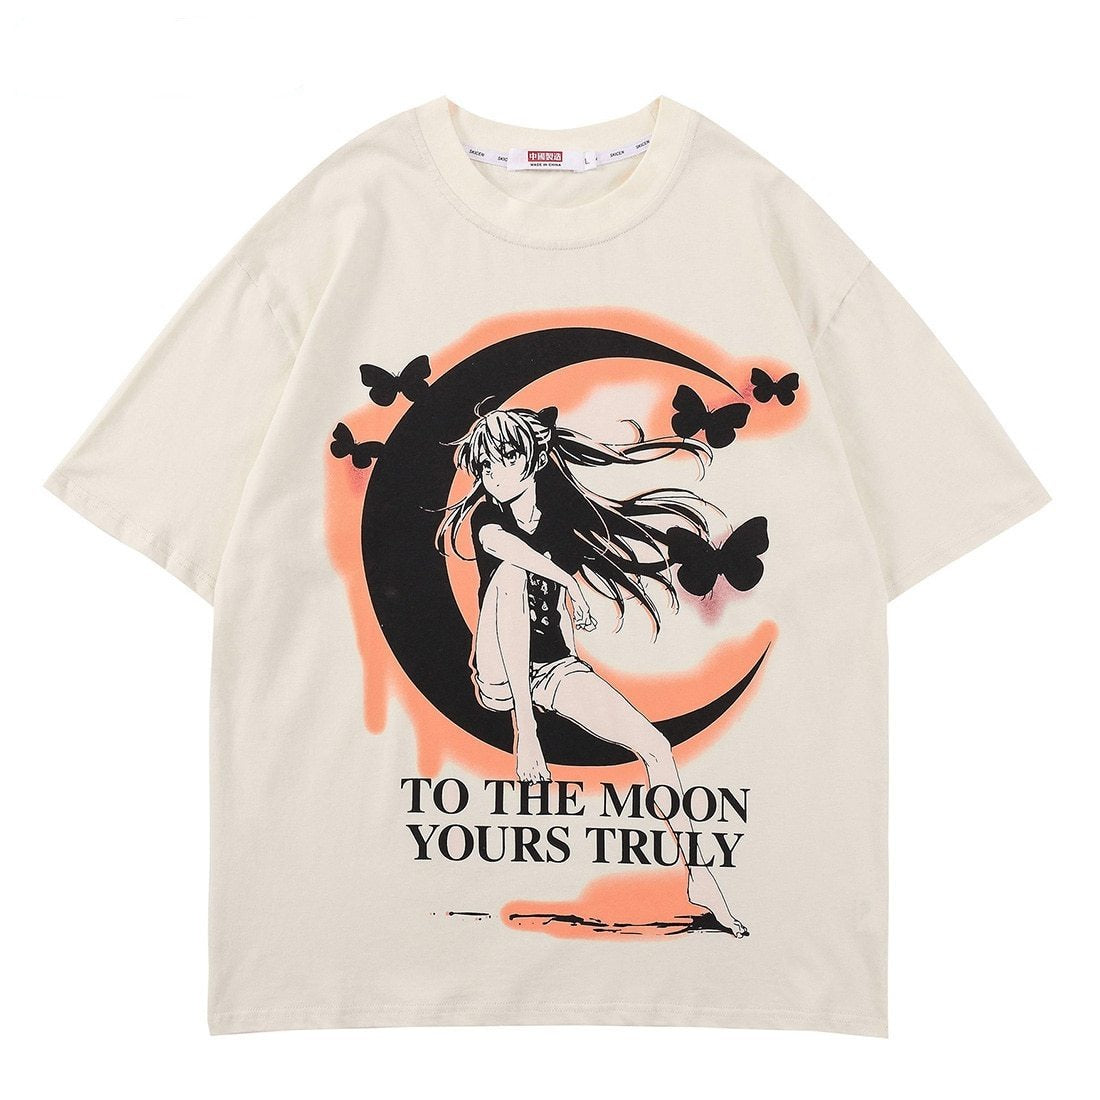 Anime - Streetwear - "TO THE MOON" - Anime Oversized T-Shirt | 3 Colors - Alpha Weebs